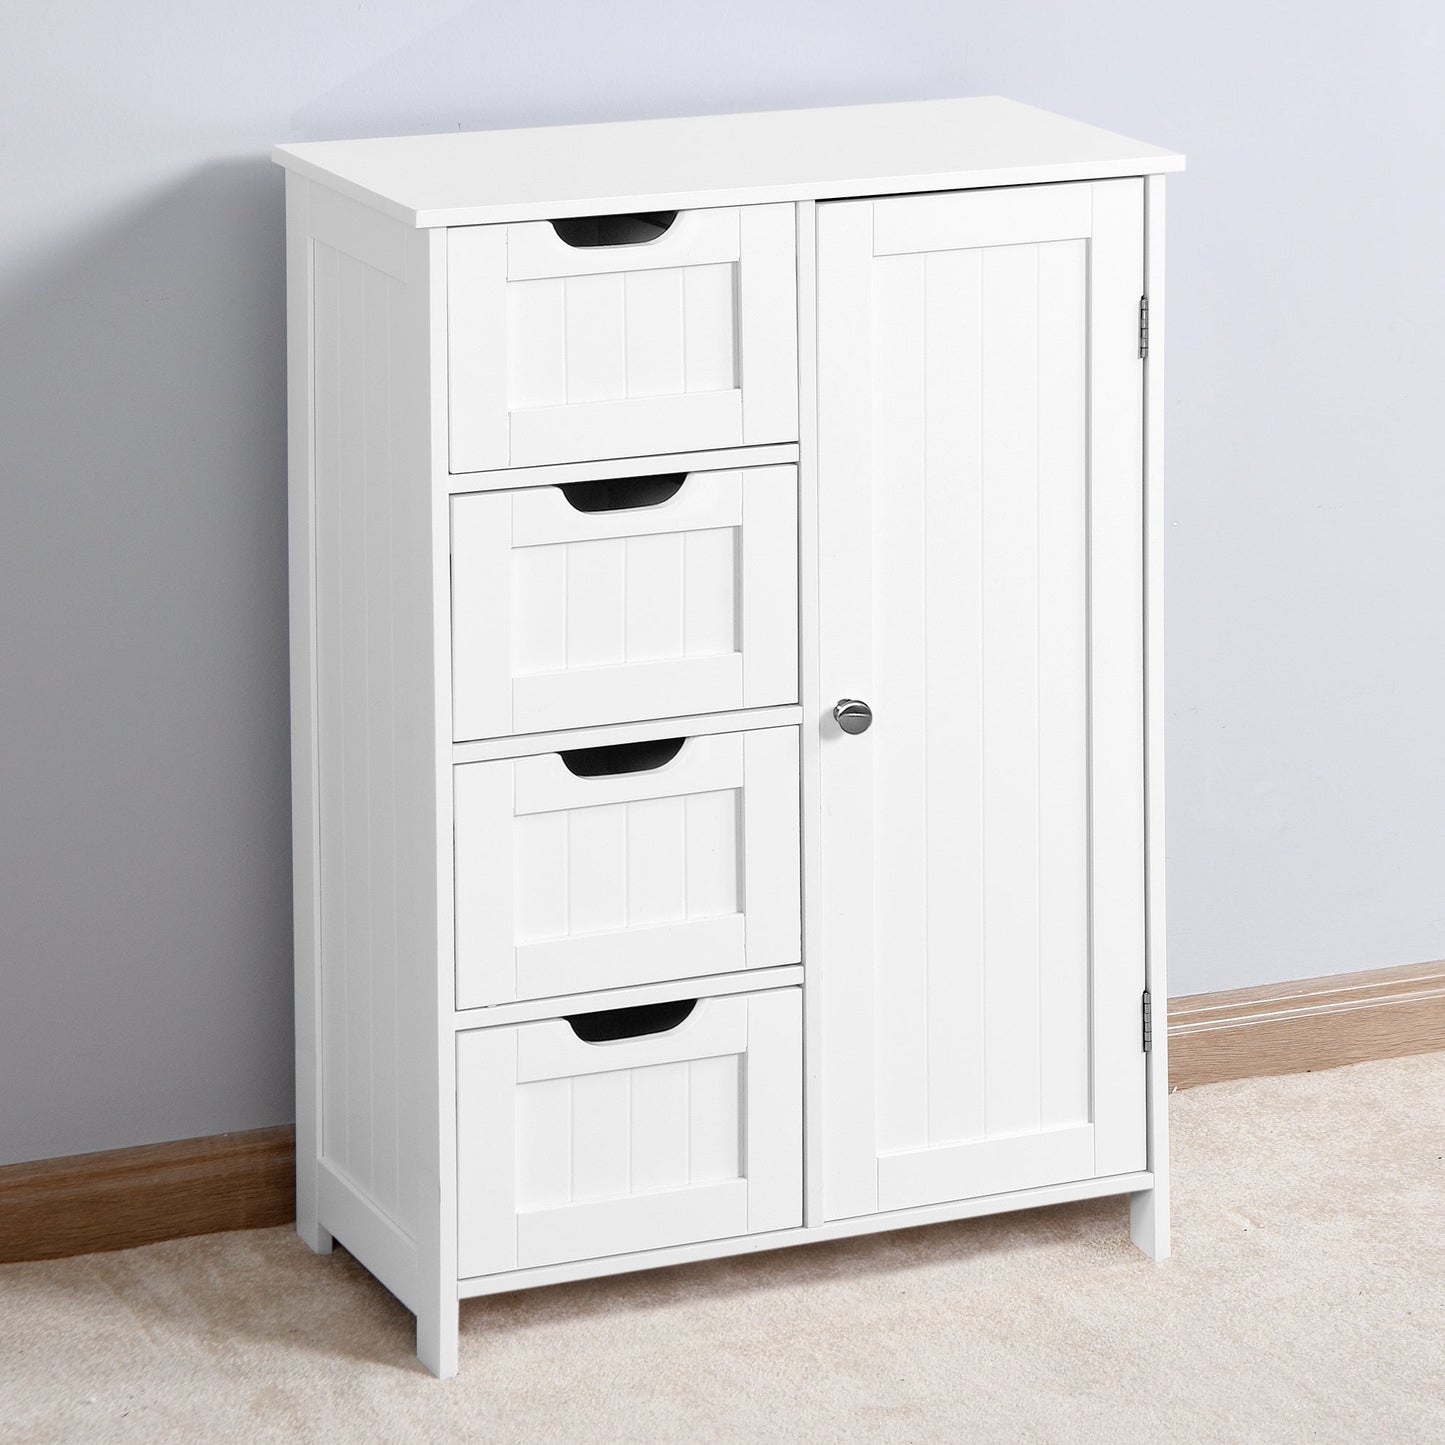 White Bathroom Storage Cabinet, Floor Cabinet with Adjustable Shelf and Drawers Home Decor by Design